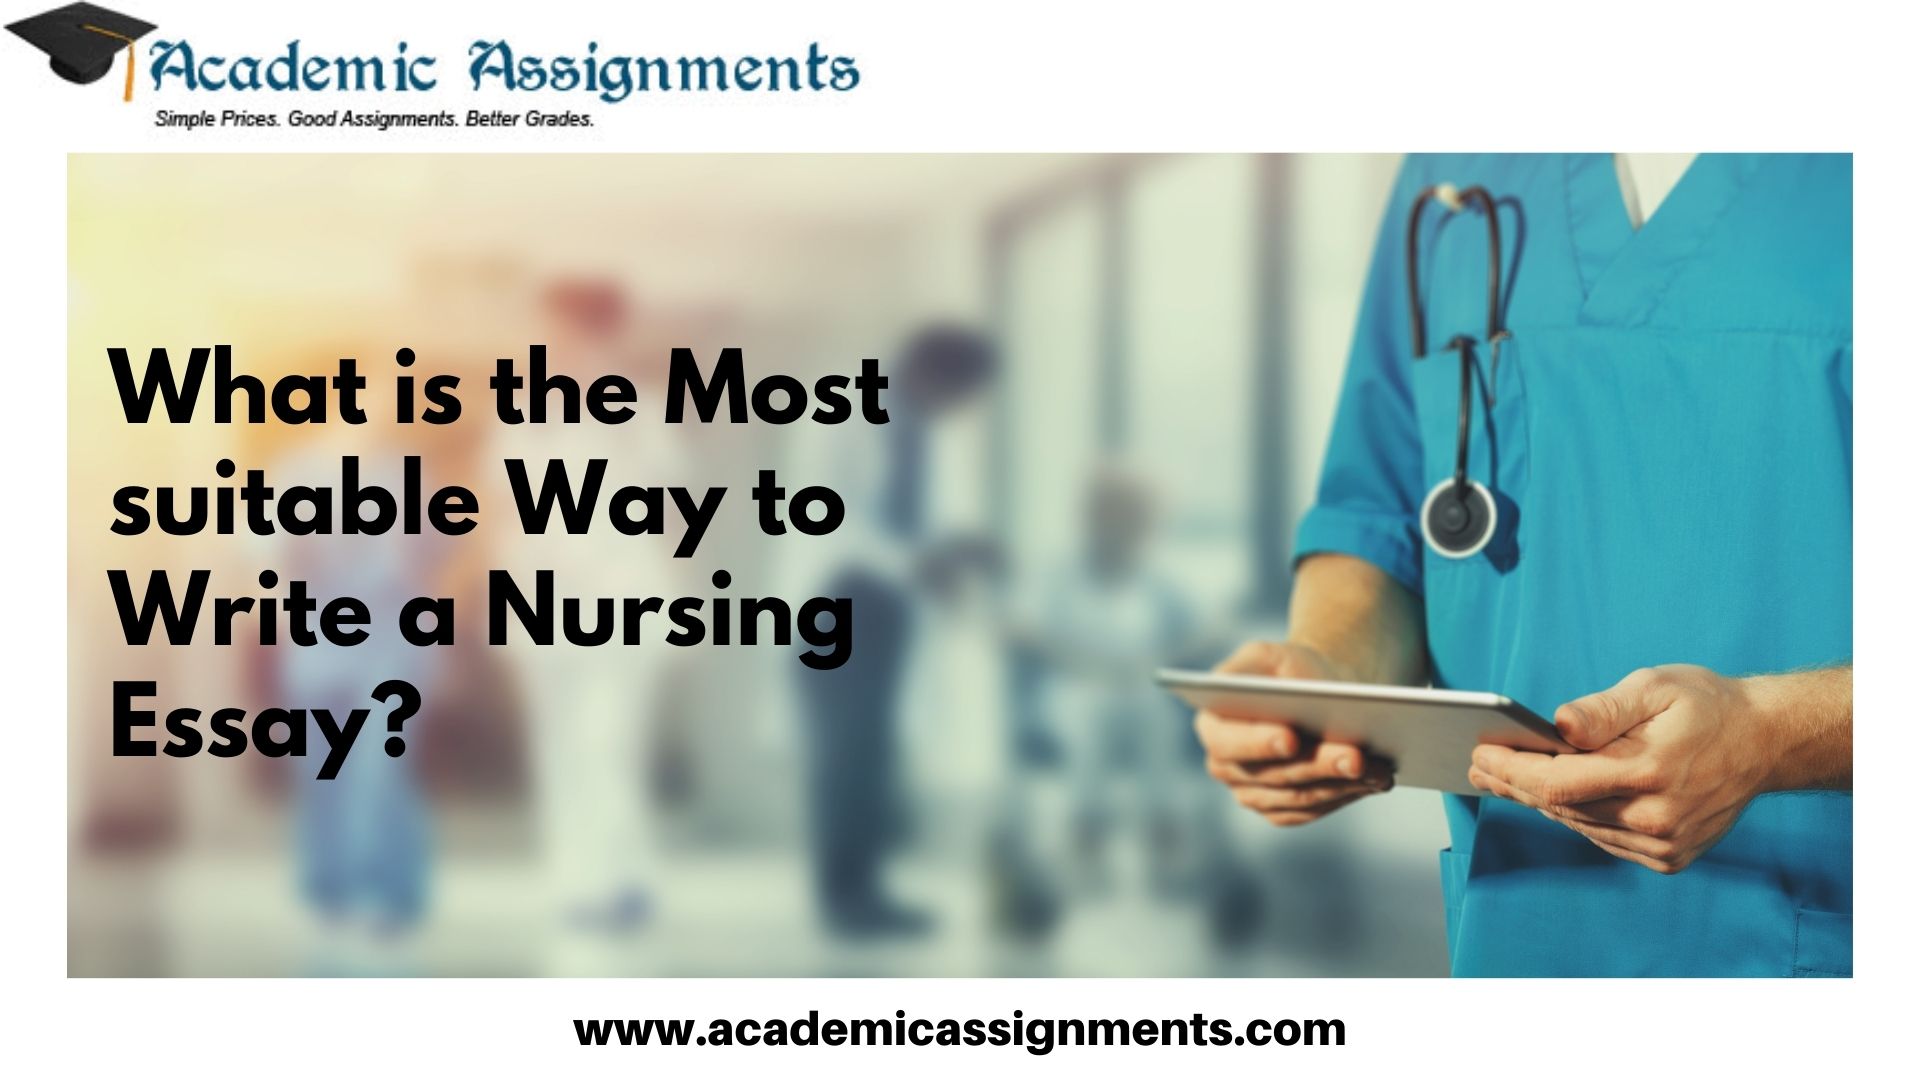 What is the Most suitable Way to Write a Nursing Essay